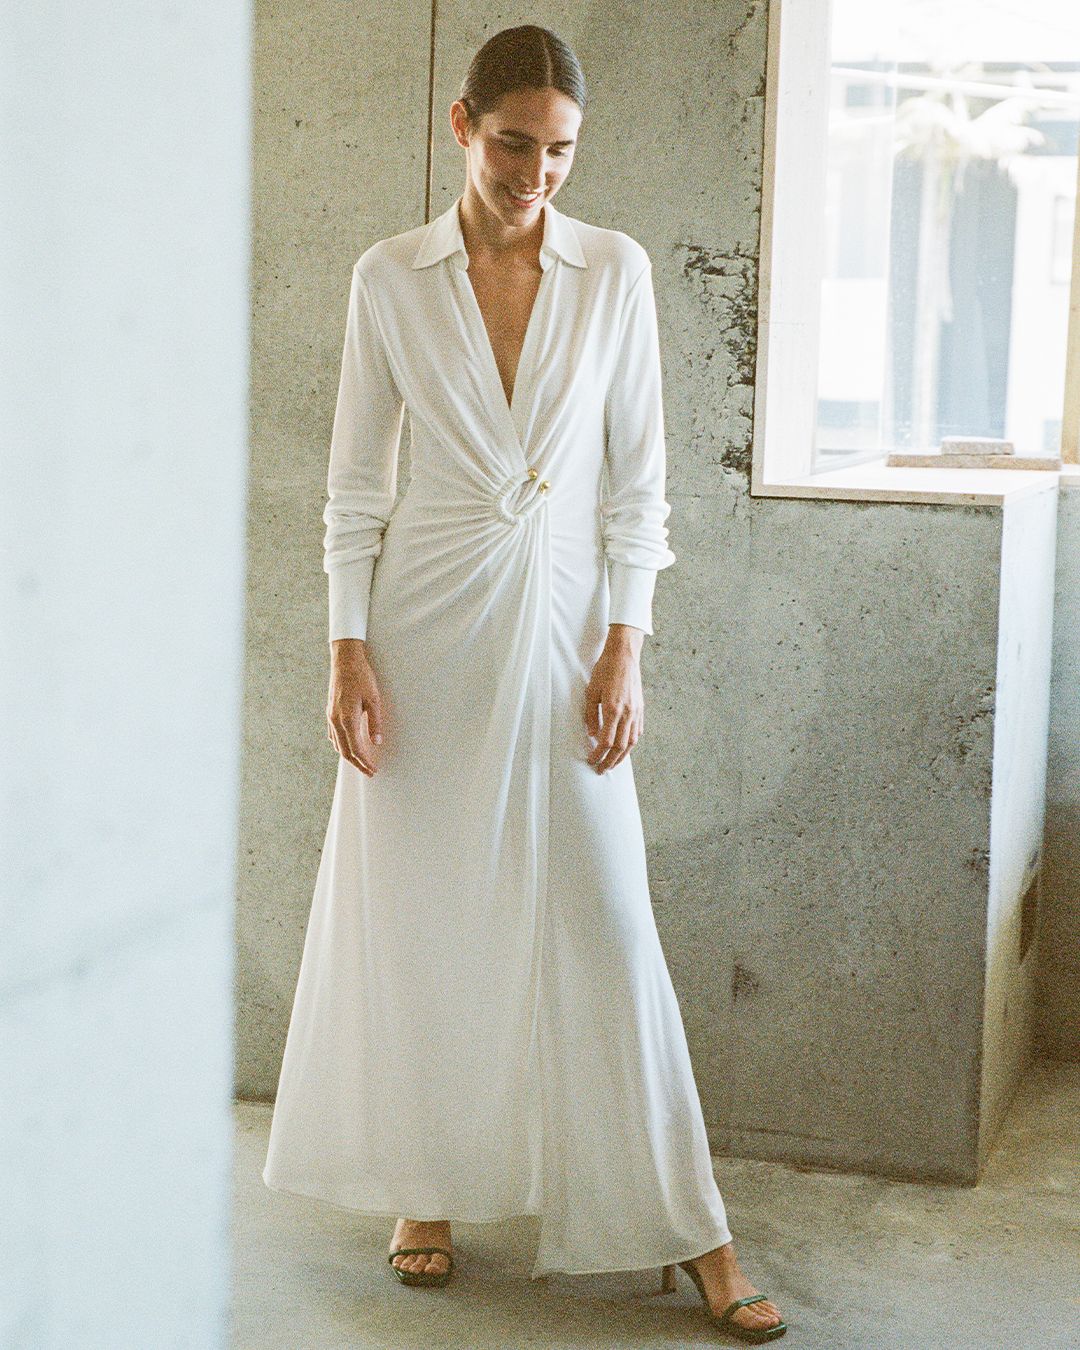 Bianca Marchi looking down standing in front of a concrete wall wearing a white gown